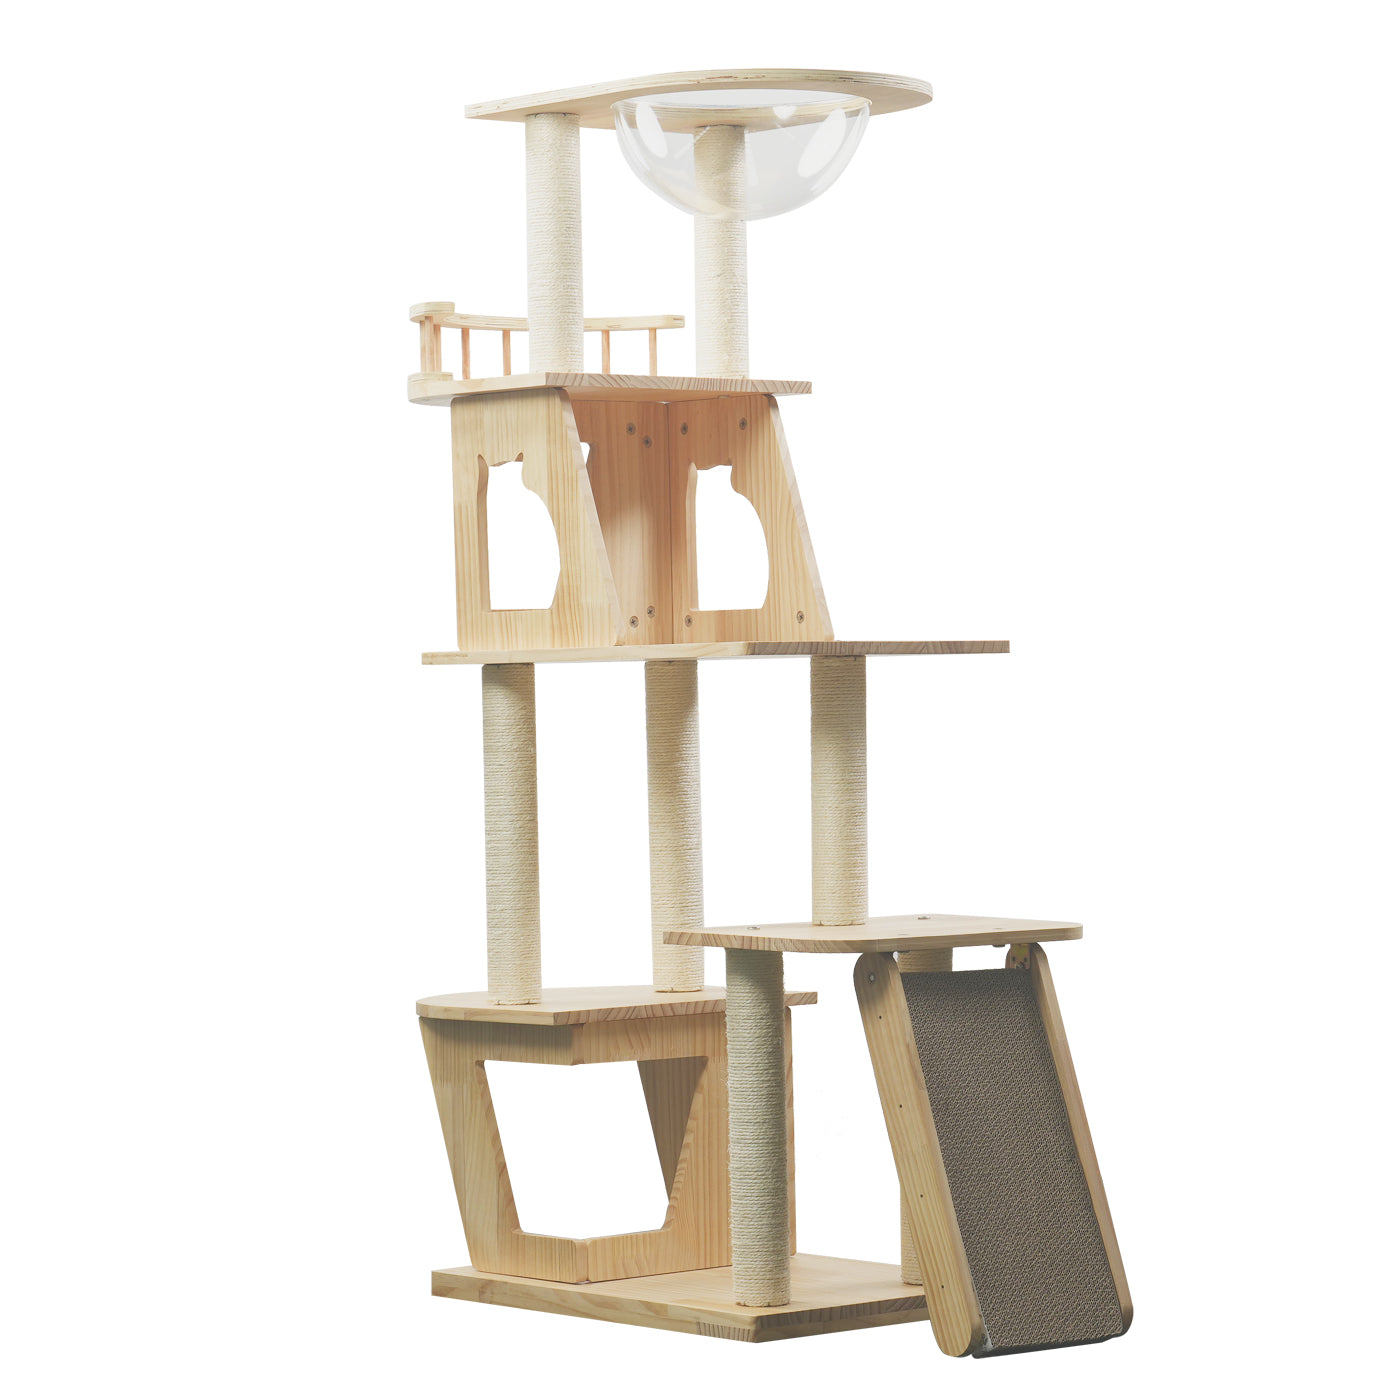 Large Wooden Cat Tree Cat Scratching Post Modern Cat Condo with Natural Sisal Rope